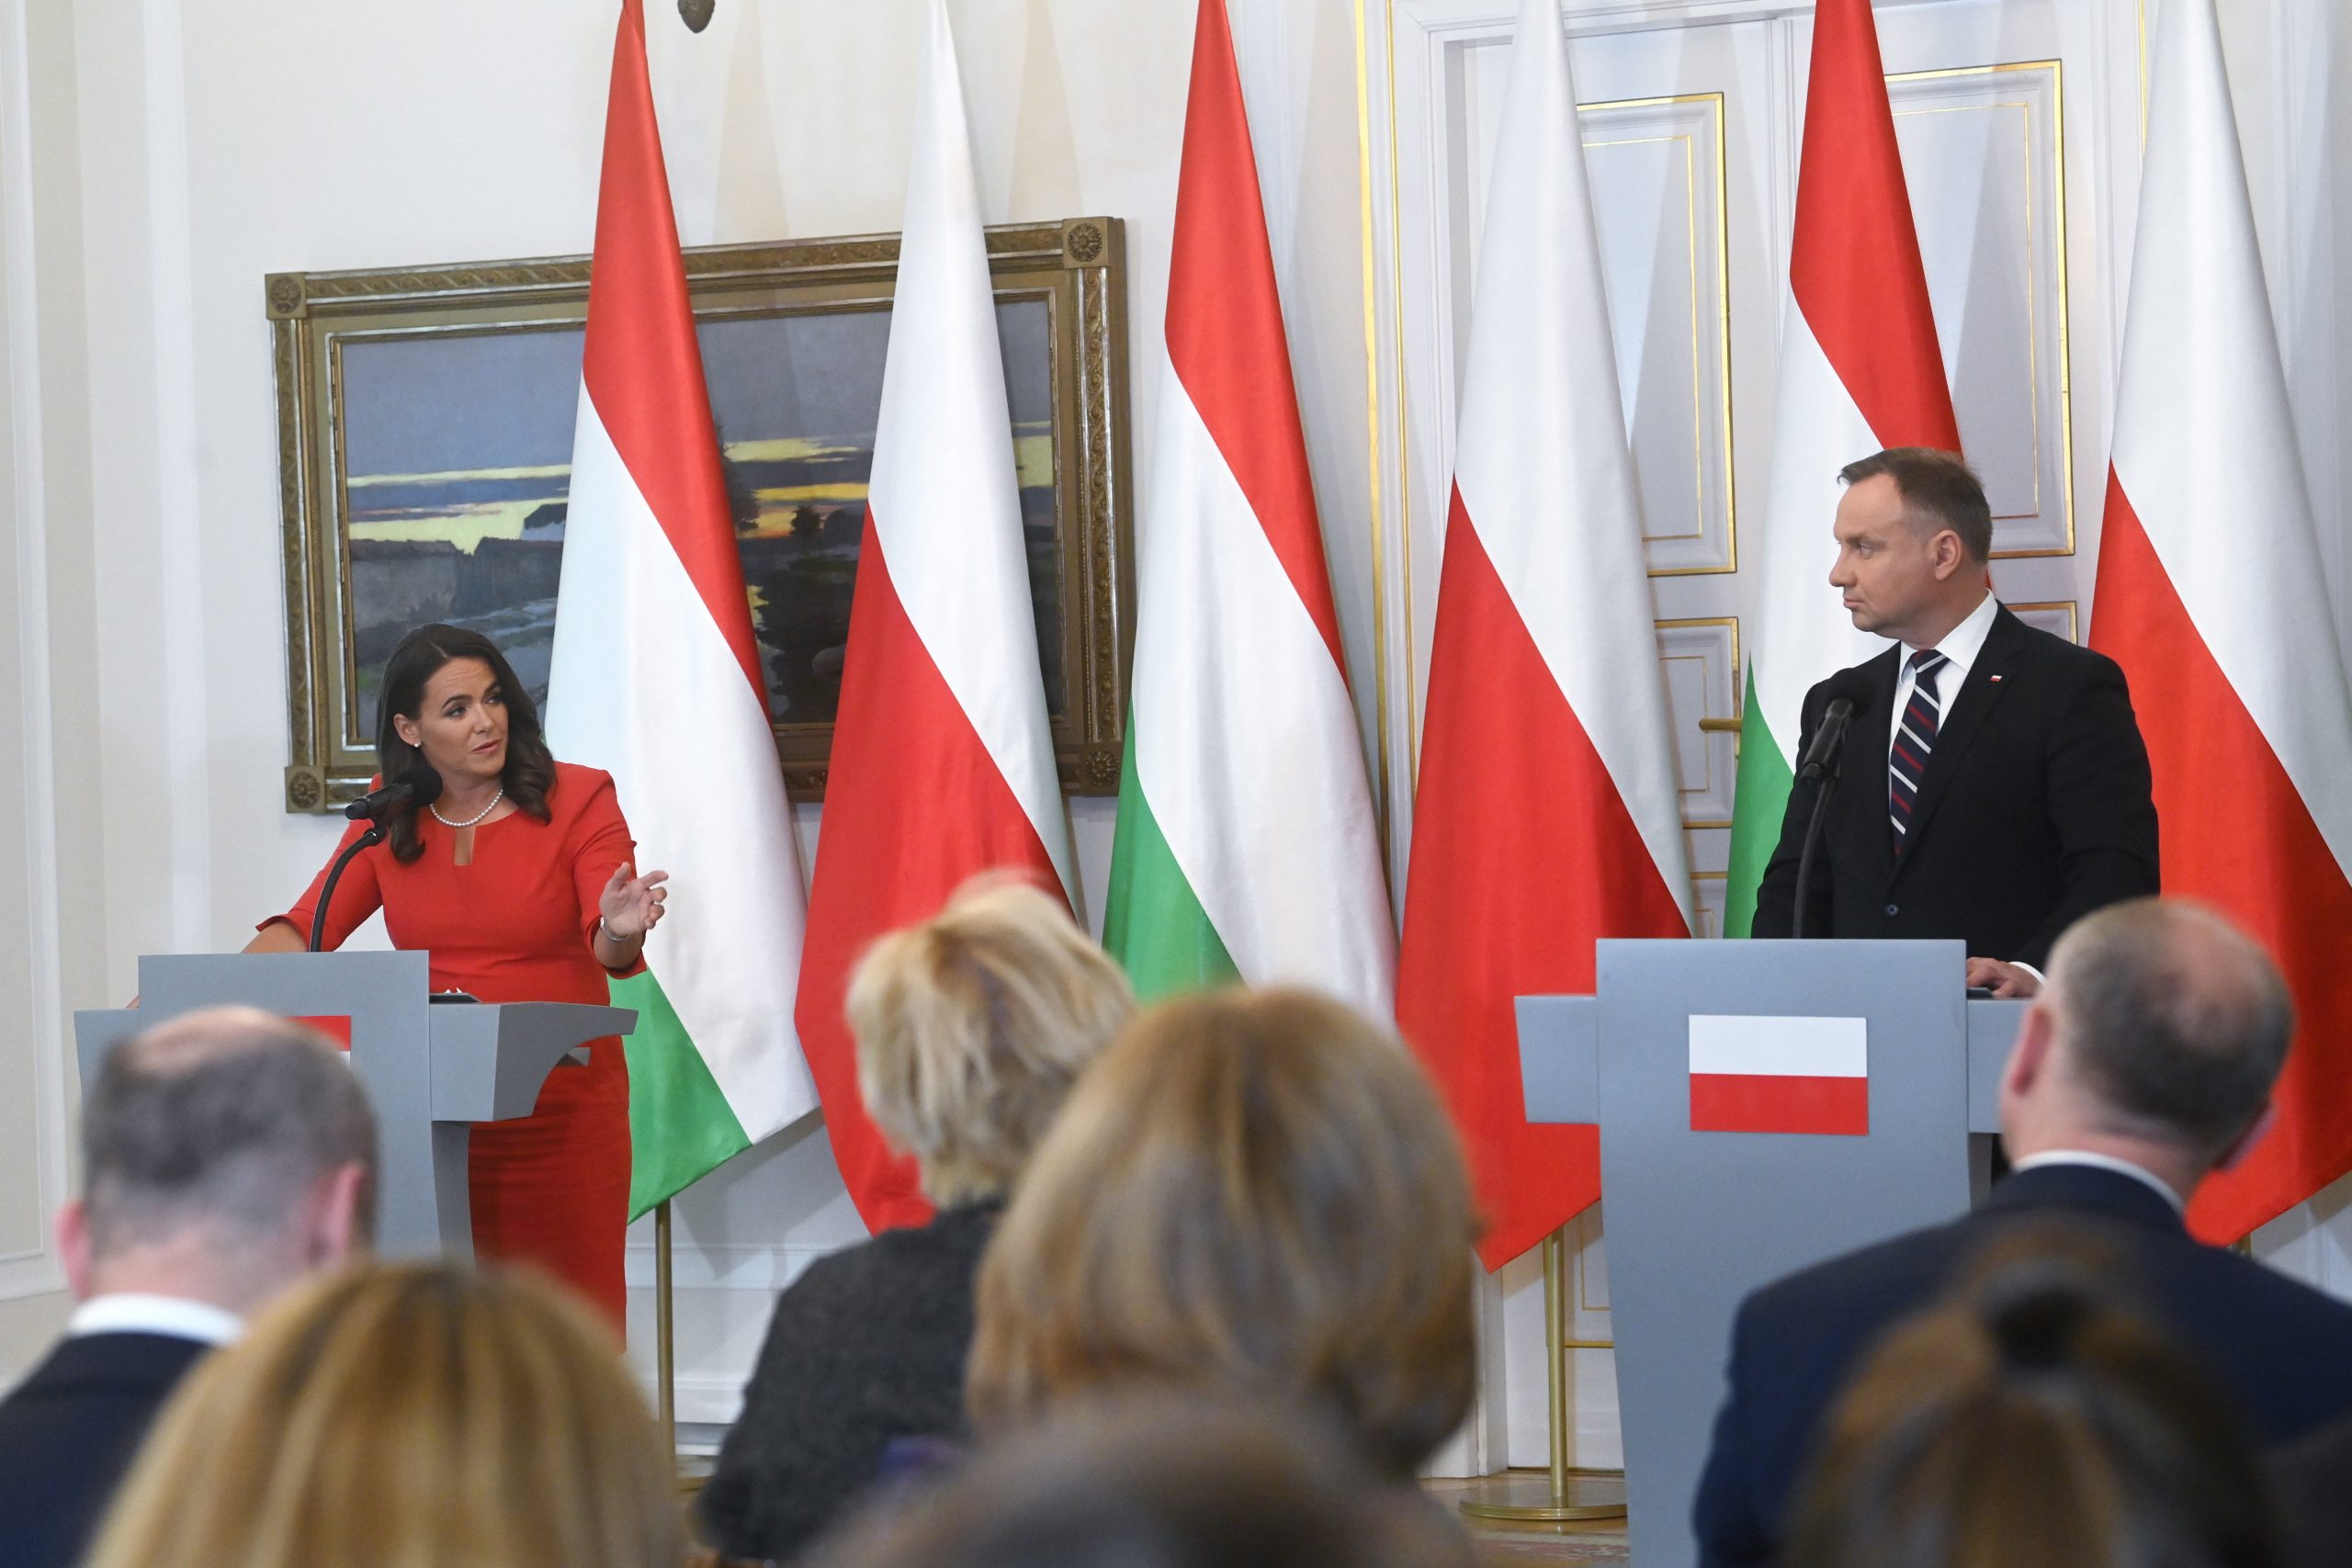 President Novak: Poland, Hungary, Requests EC to Make Allocations by Reconstruction Fund Available